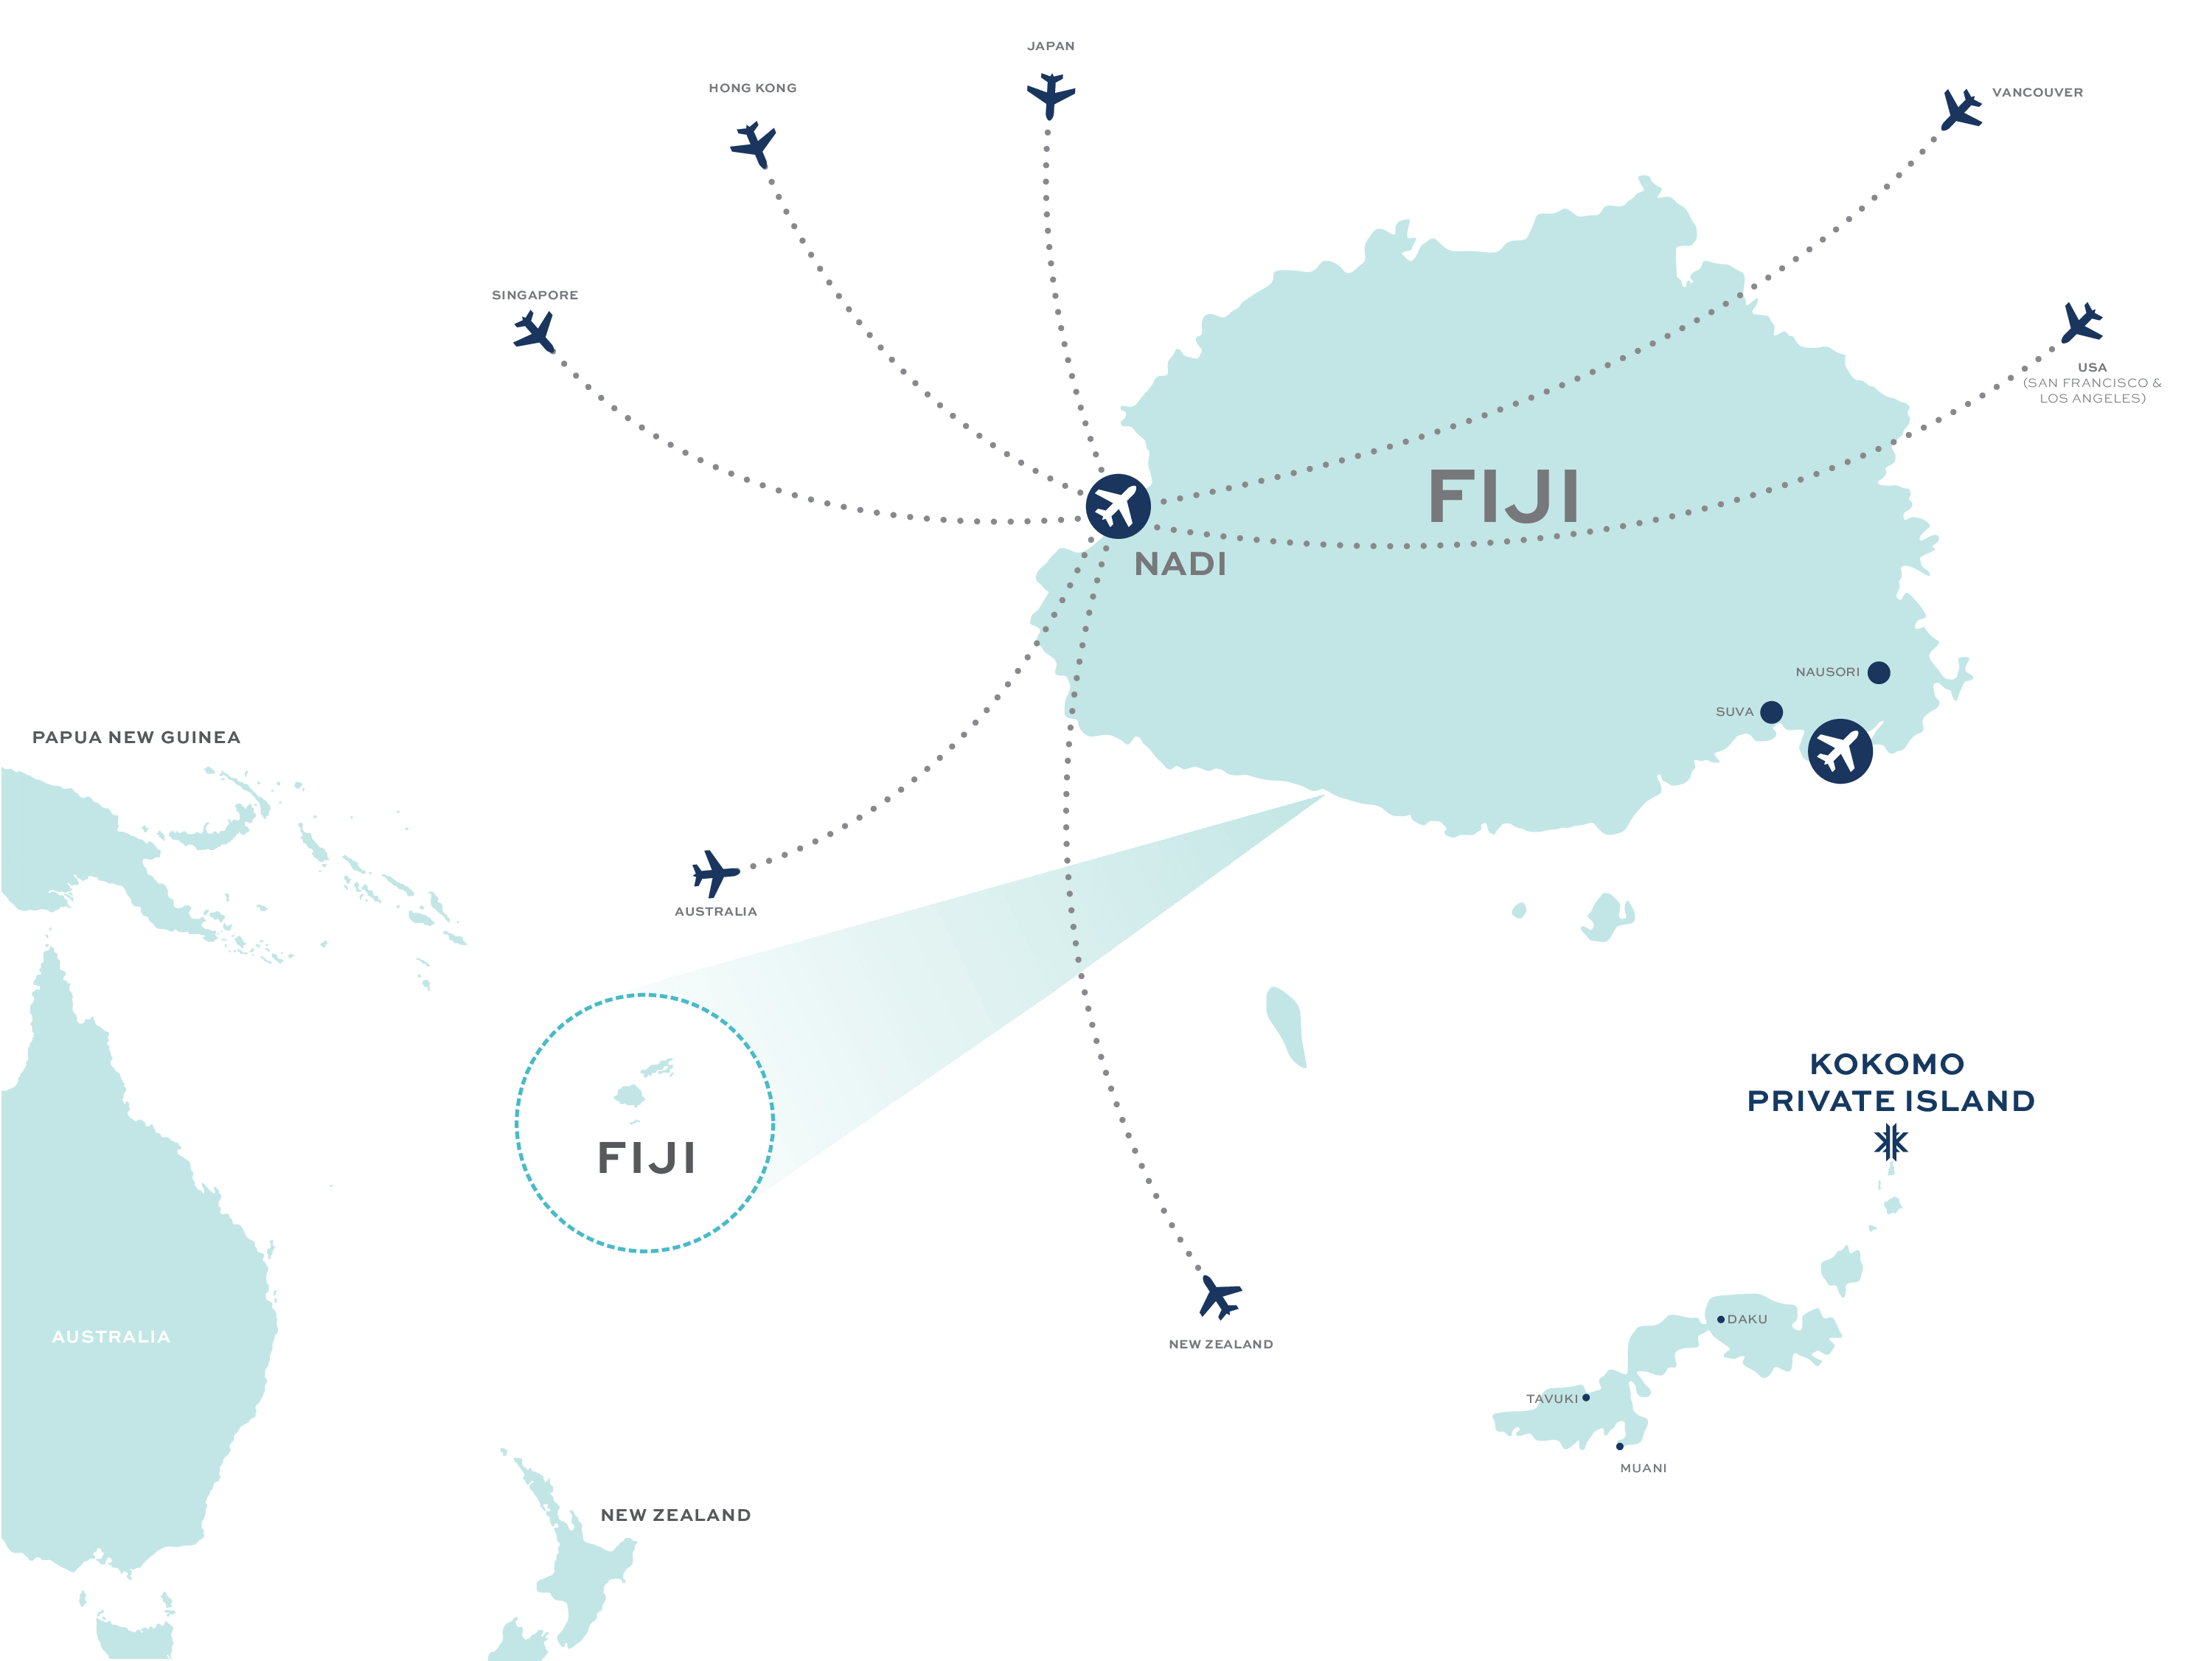 A stylised map showing flight routes into Fiji from a number of key locations – Japan, Hong Kong, Singapore, Vancouver, USA (San Francisco & Los Angeles), Australia and New Zealand. Kokomo Private Island’s location is shown to the south of mainland Fiji at the northern end of the Kadavu island group.